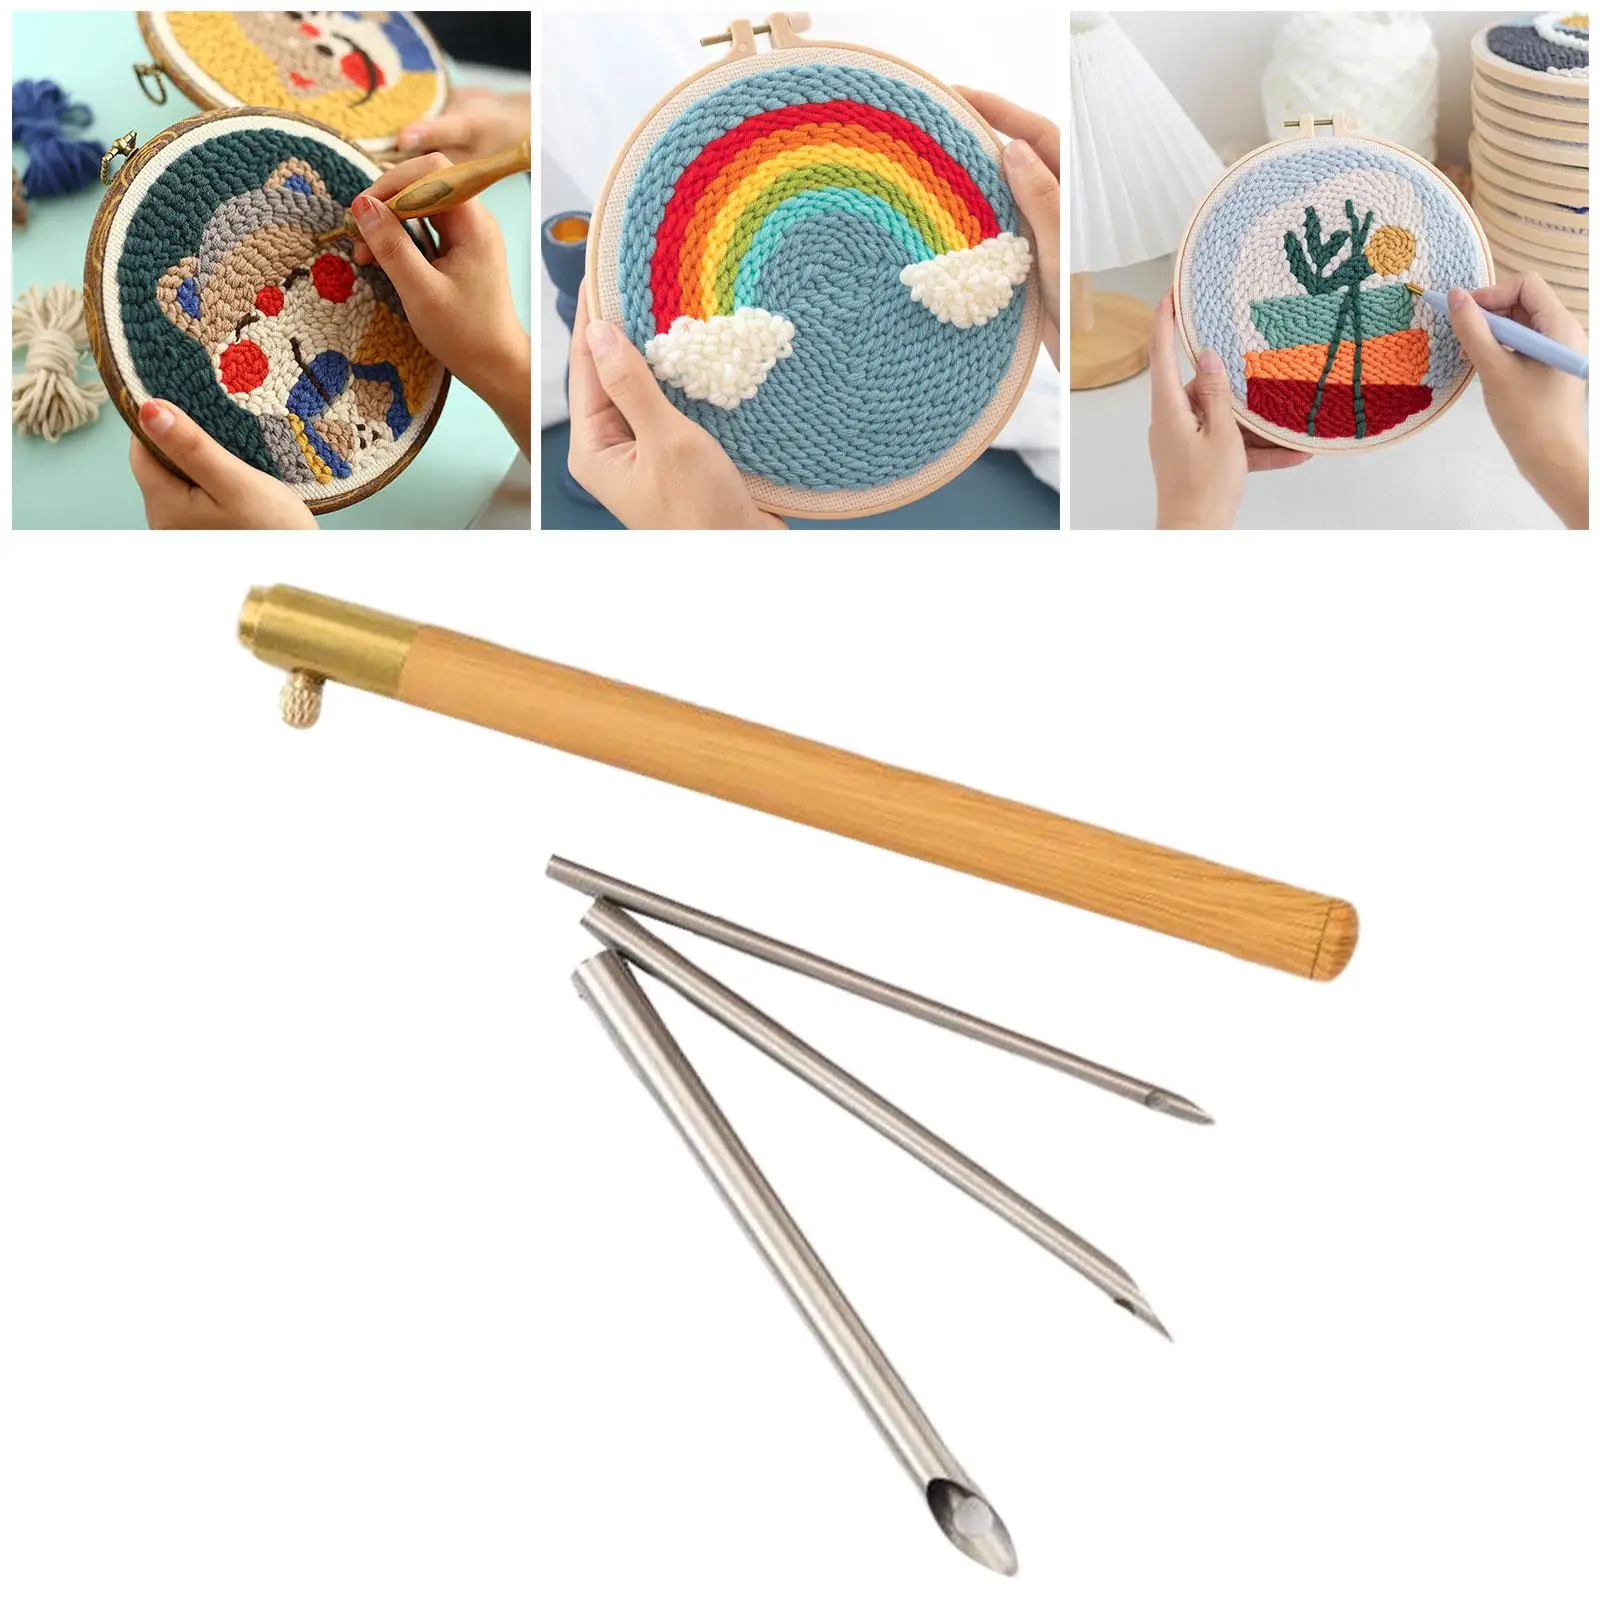 Embroidery Punch Pens Stitchwork Needle Accessories Knitting Sewing Crafting Embellishment Rug DIY Craft Stitching Applique